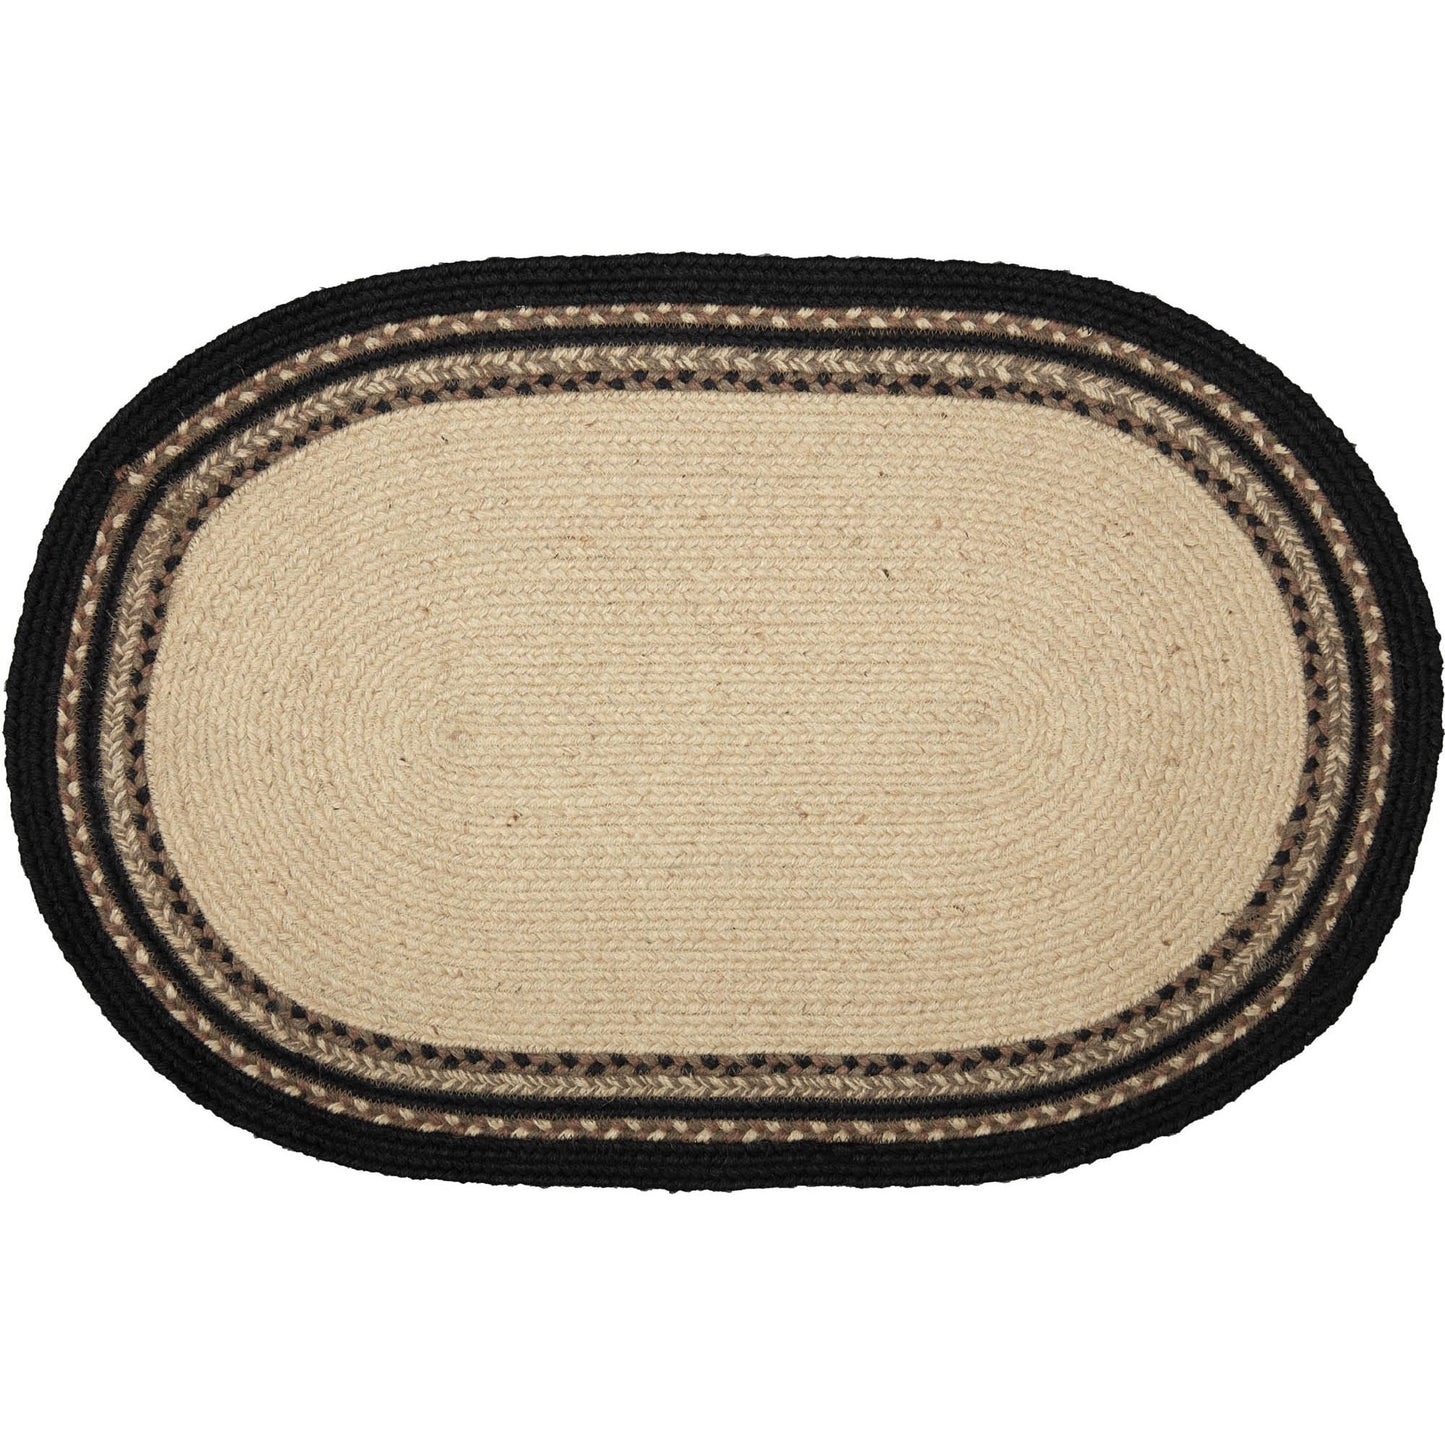 69391-Sawyer-Mill-Charcoal-Poultry-Jute-Rug-Oval-w-Pad-20x30-image-7